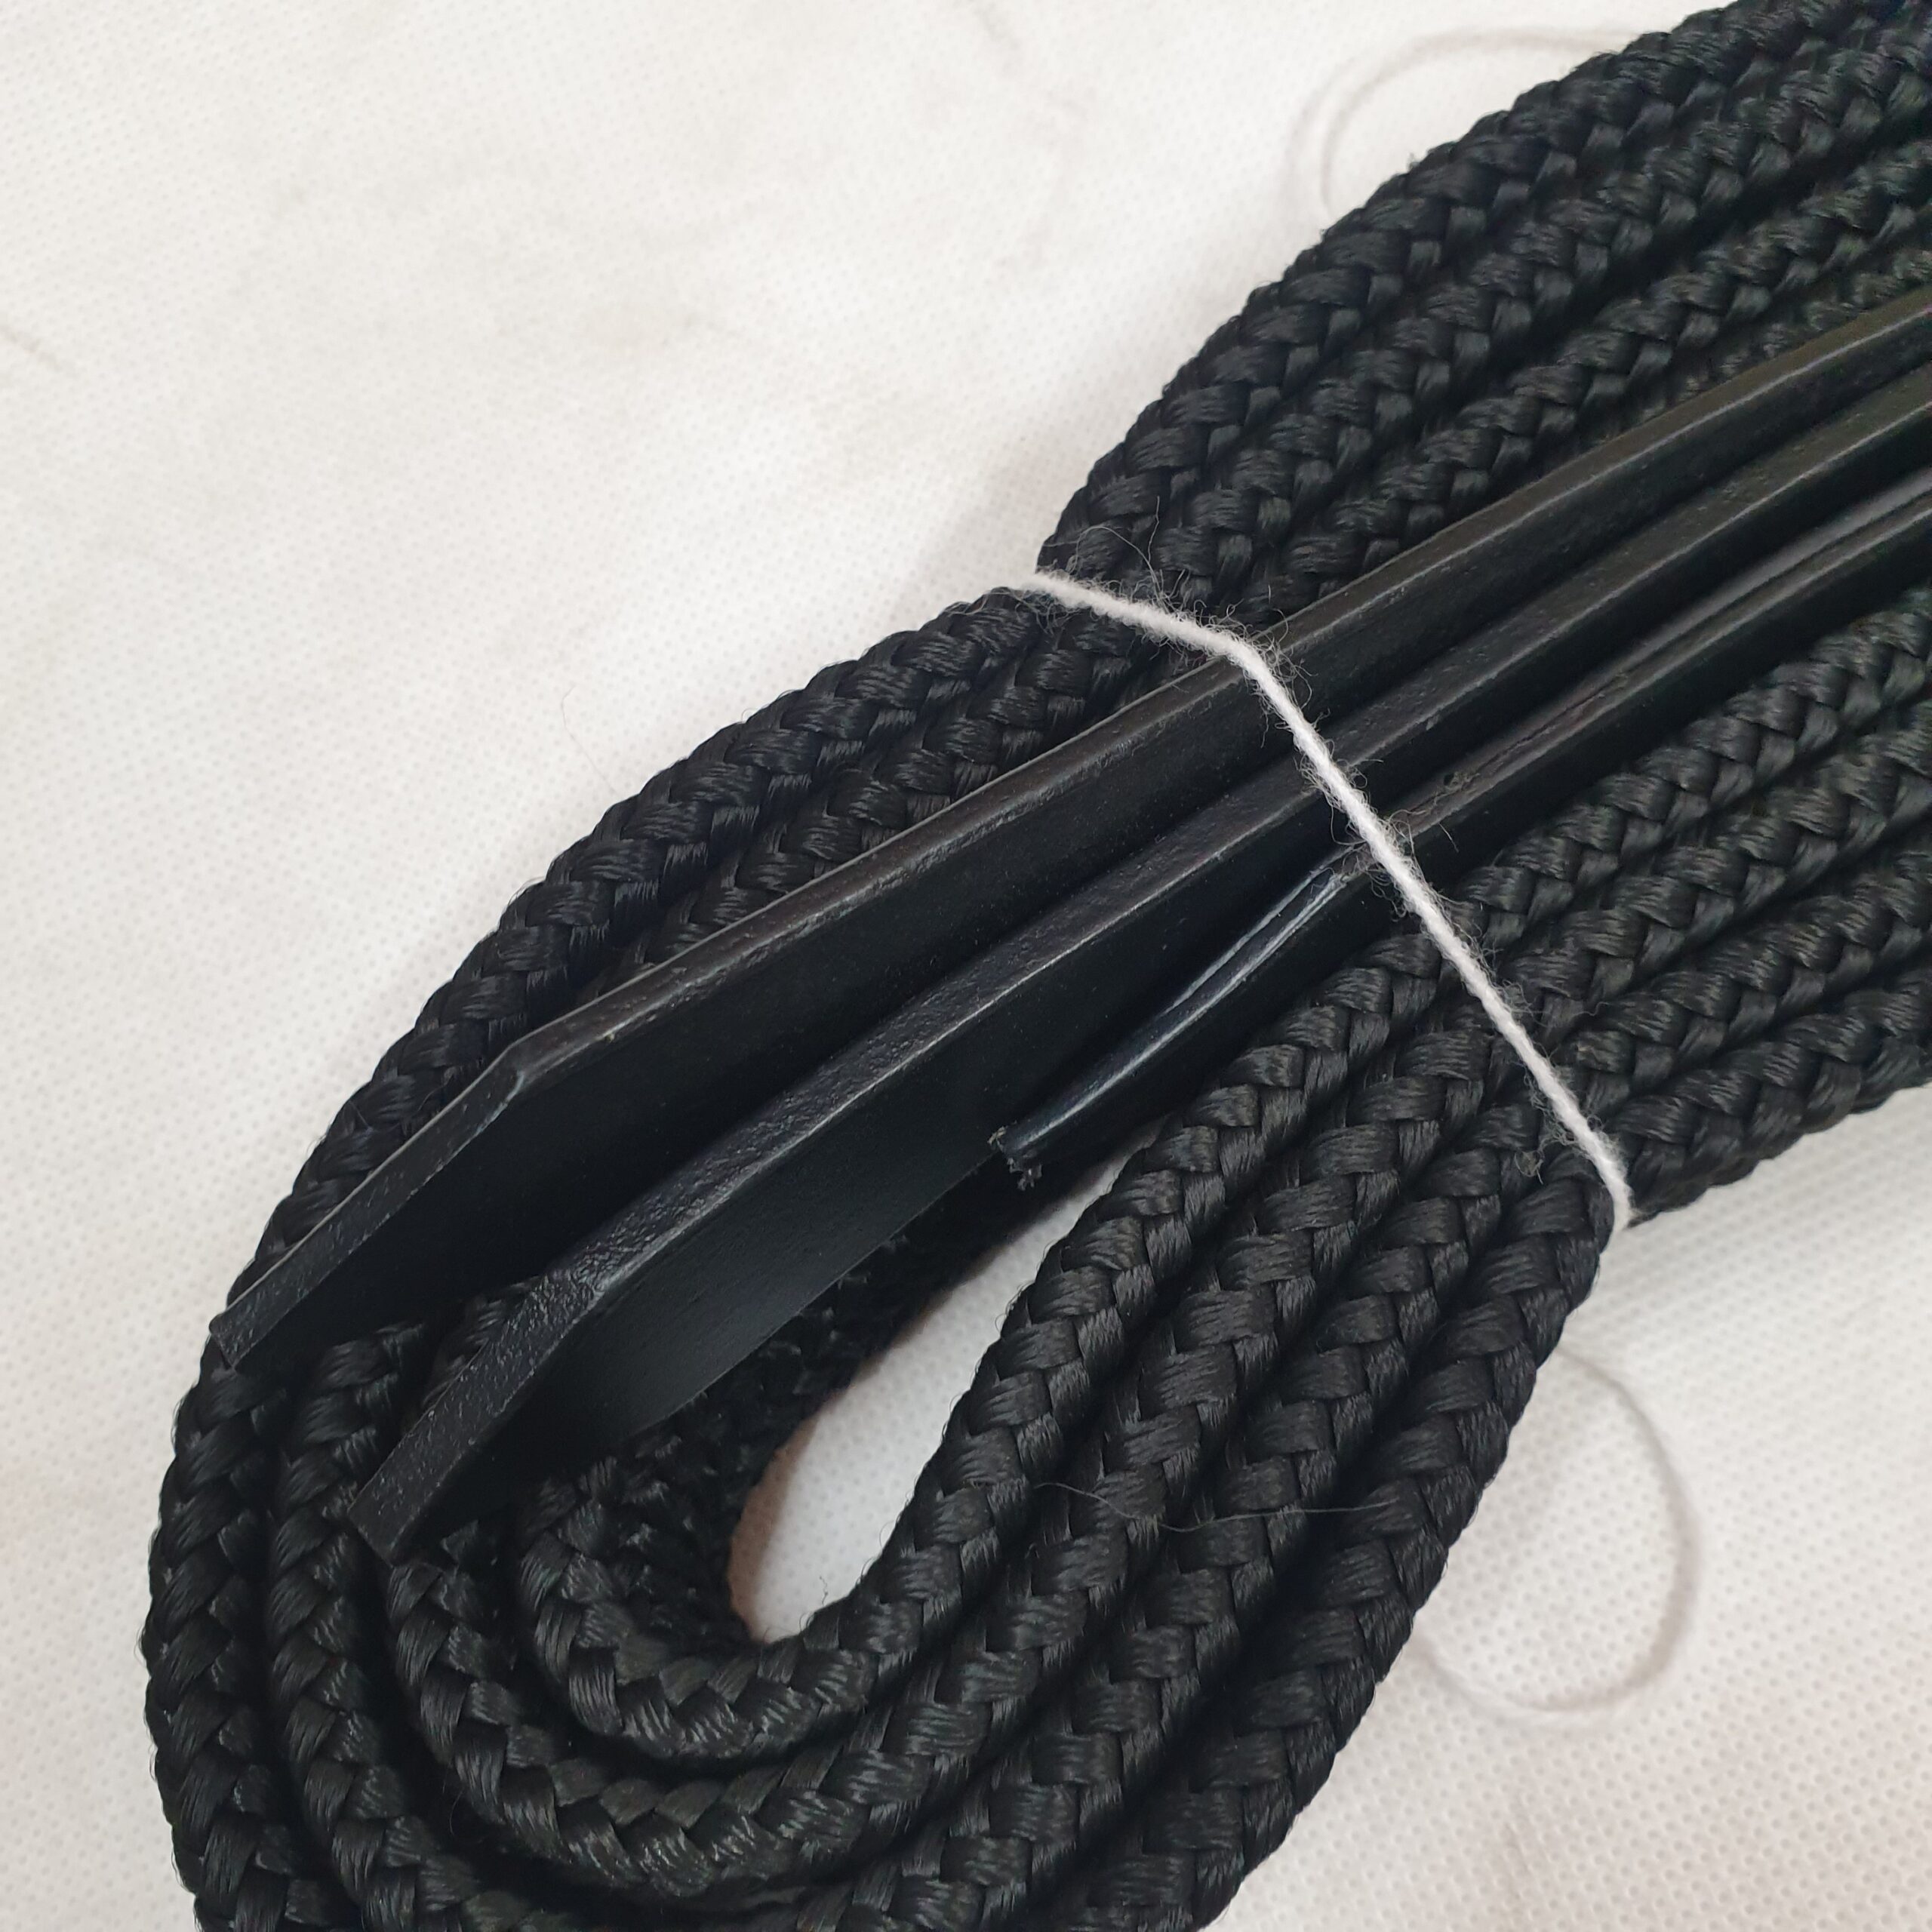 A23.41.1-3 Flat waxed Nylon split Reins with leather ends and Trigger ...